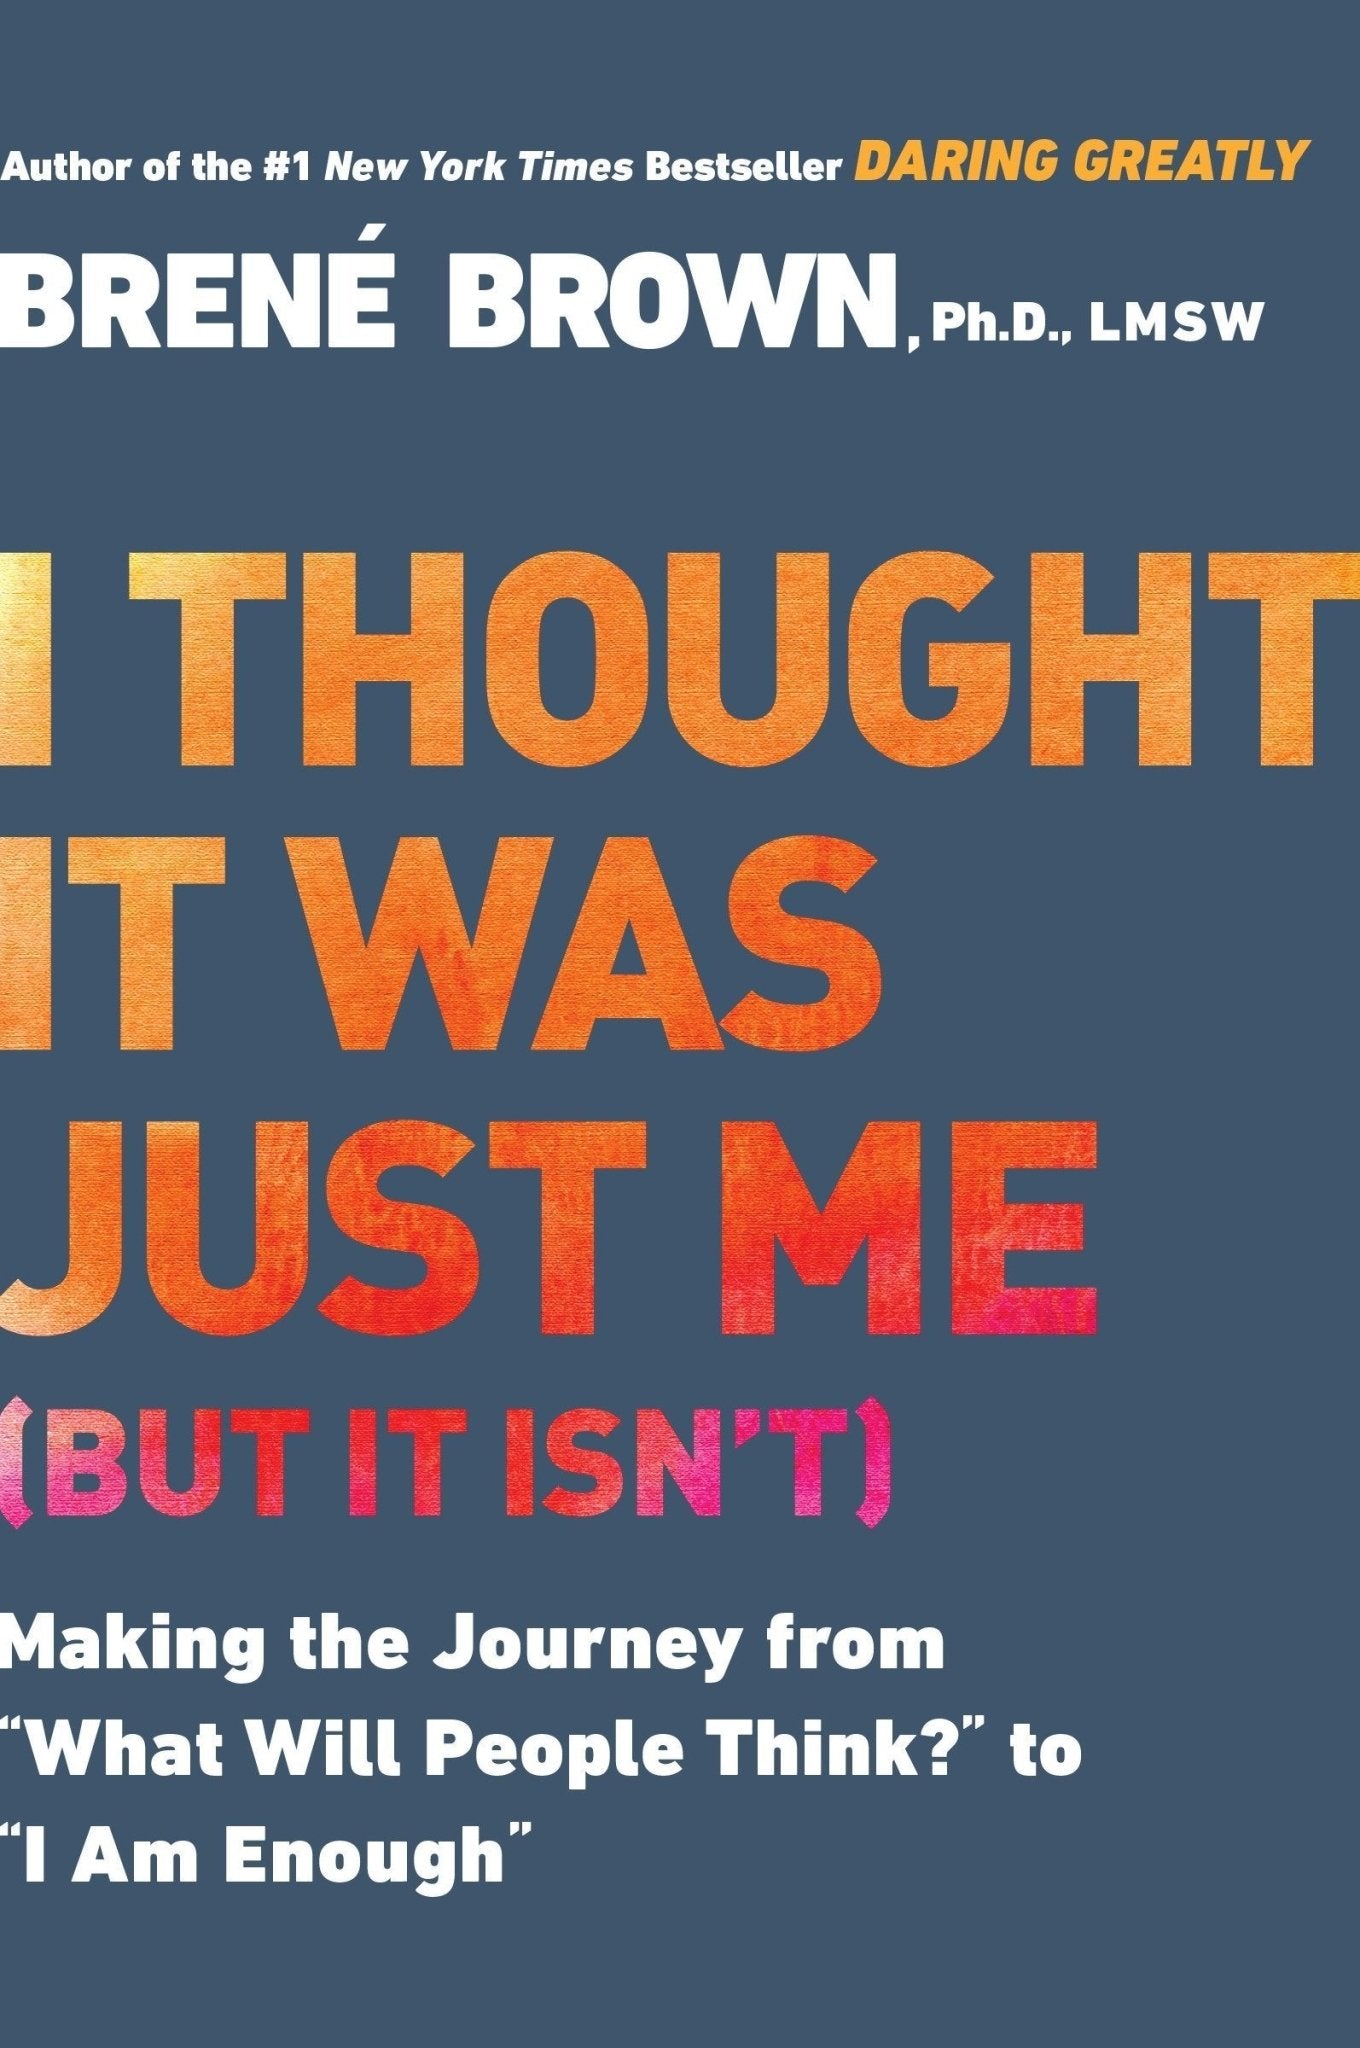 I Thought It Was Just Me (But It Isn't): Making the Journey from What Will People Think? to I Am Enough by Brene Brown [Paperback] - LV'S Global Media